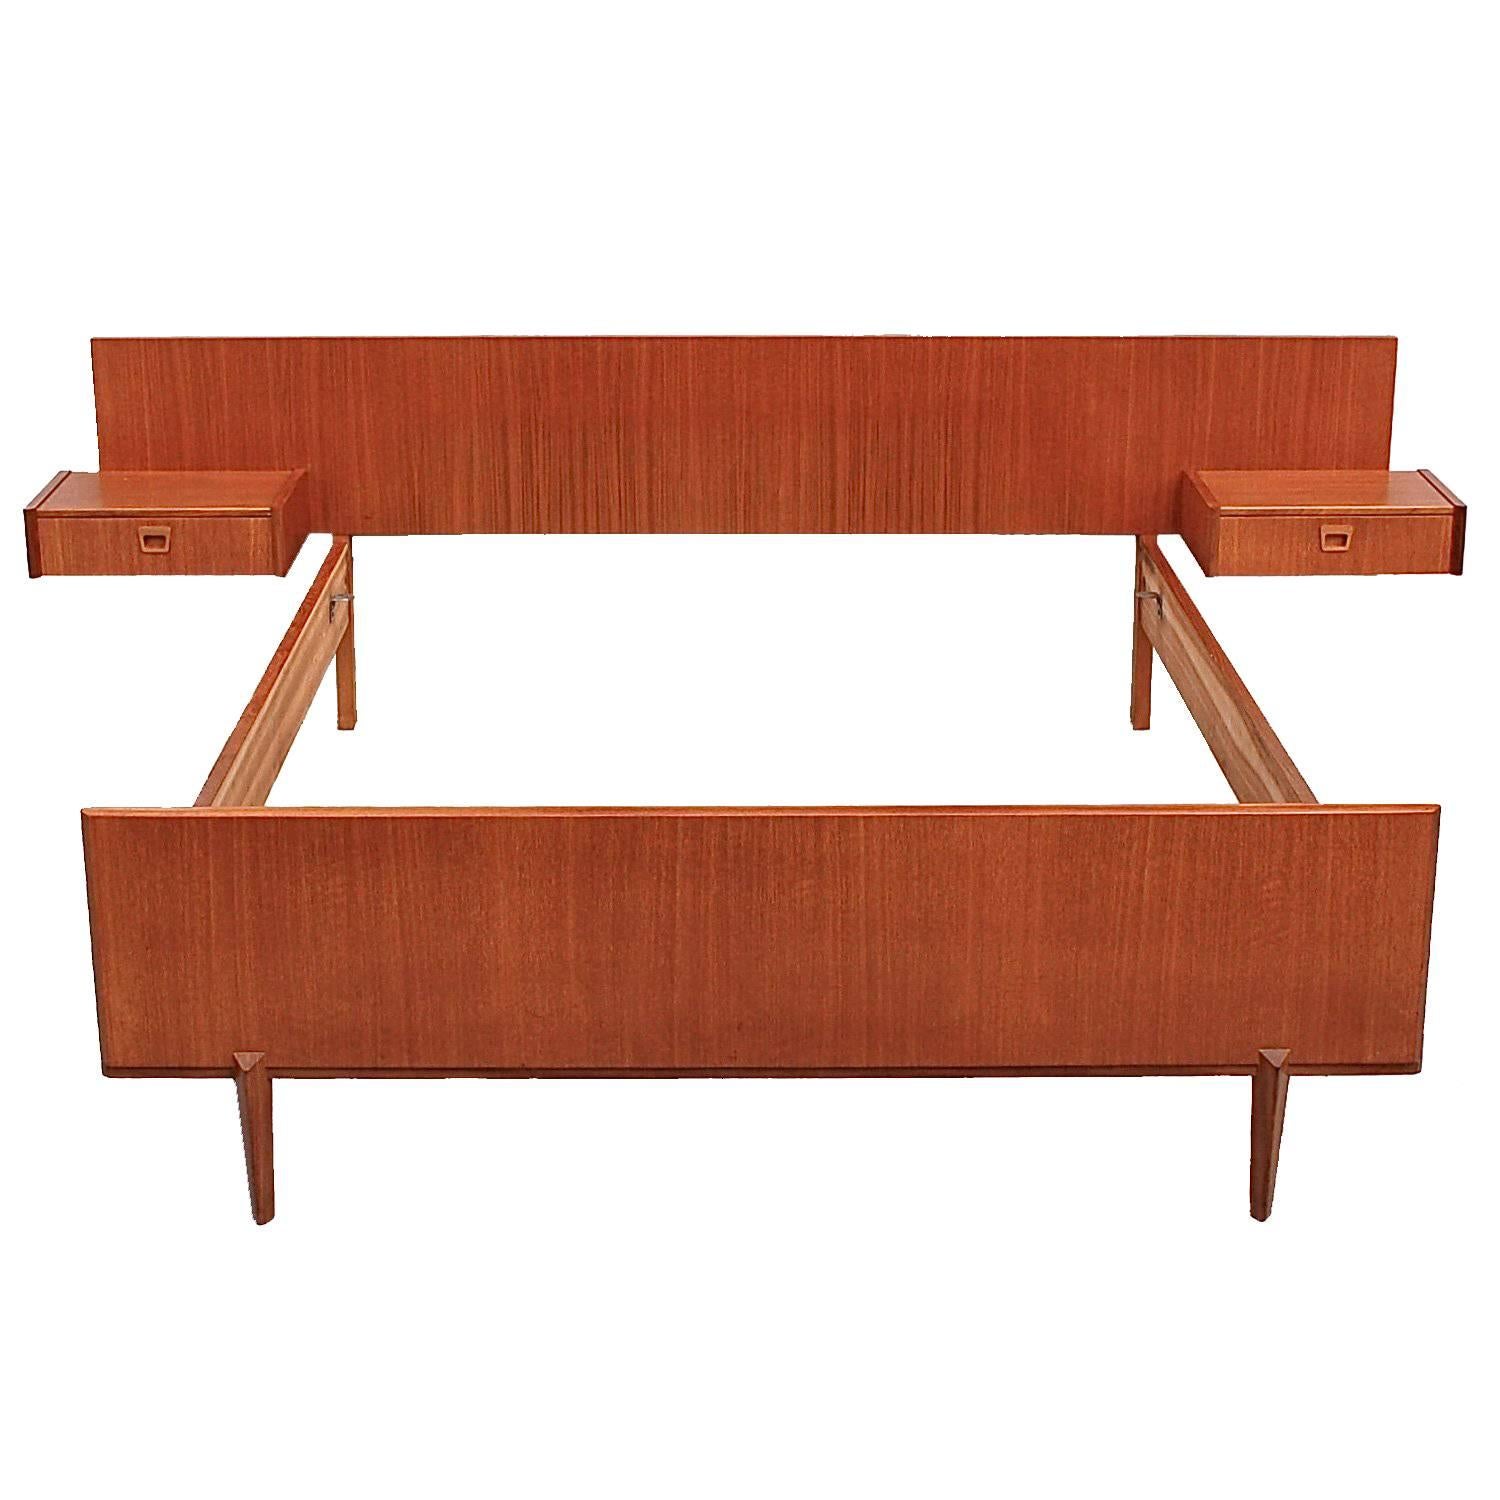 Mid-Century Modern Double Bed with Floating Night Tables, circa 1950s